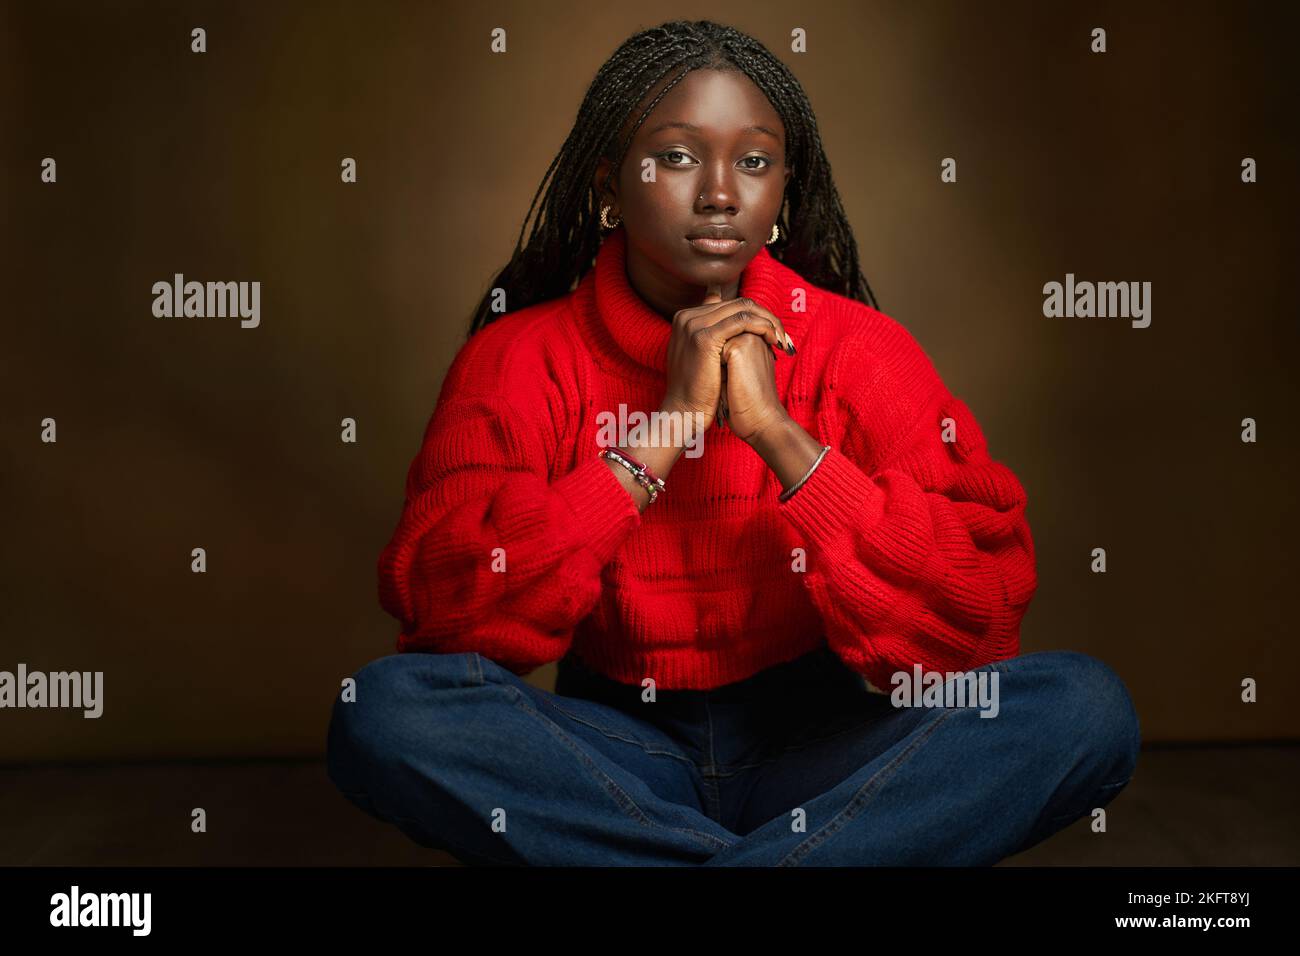 Pensive African American teenager sitting with legs crossed in studio on blurred brown background looking at camera thoughtfully Stock Photo